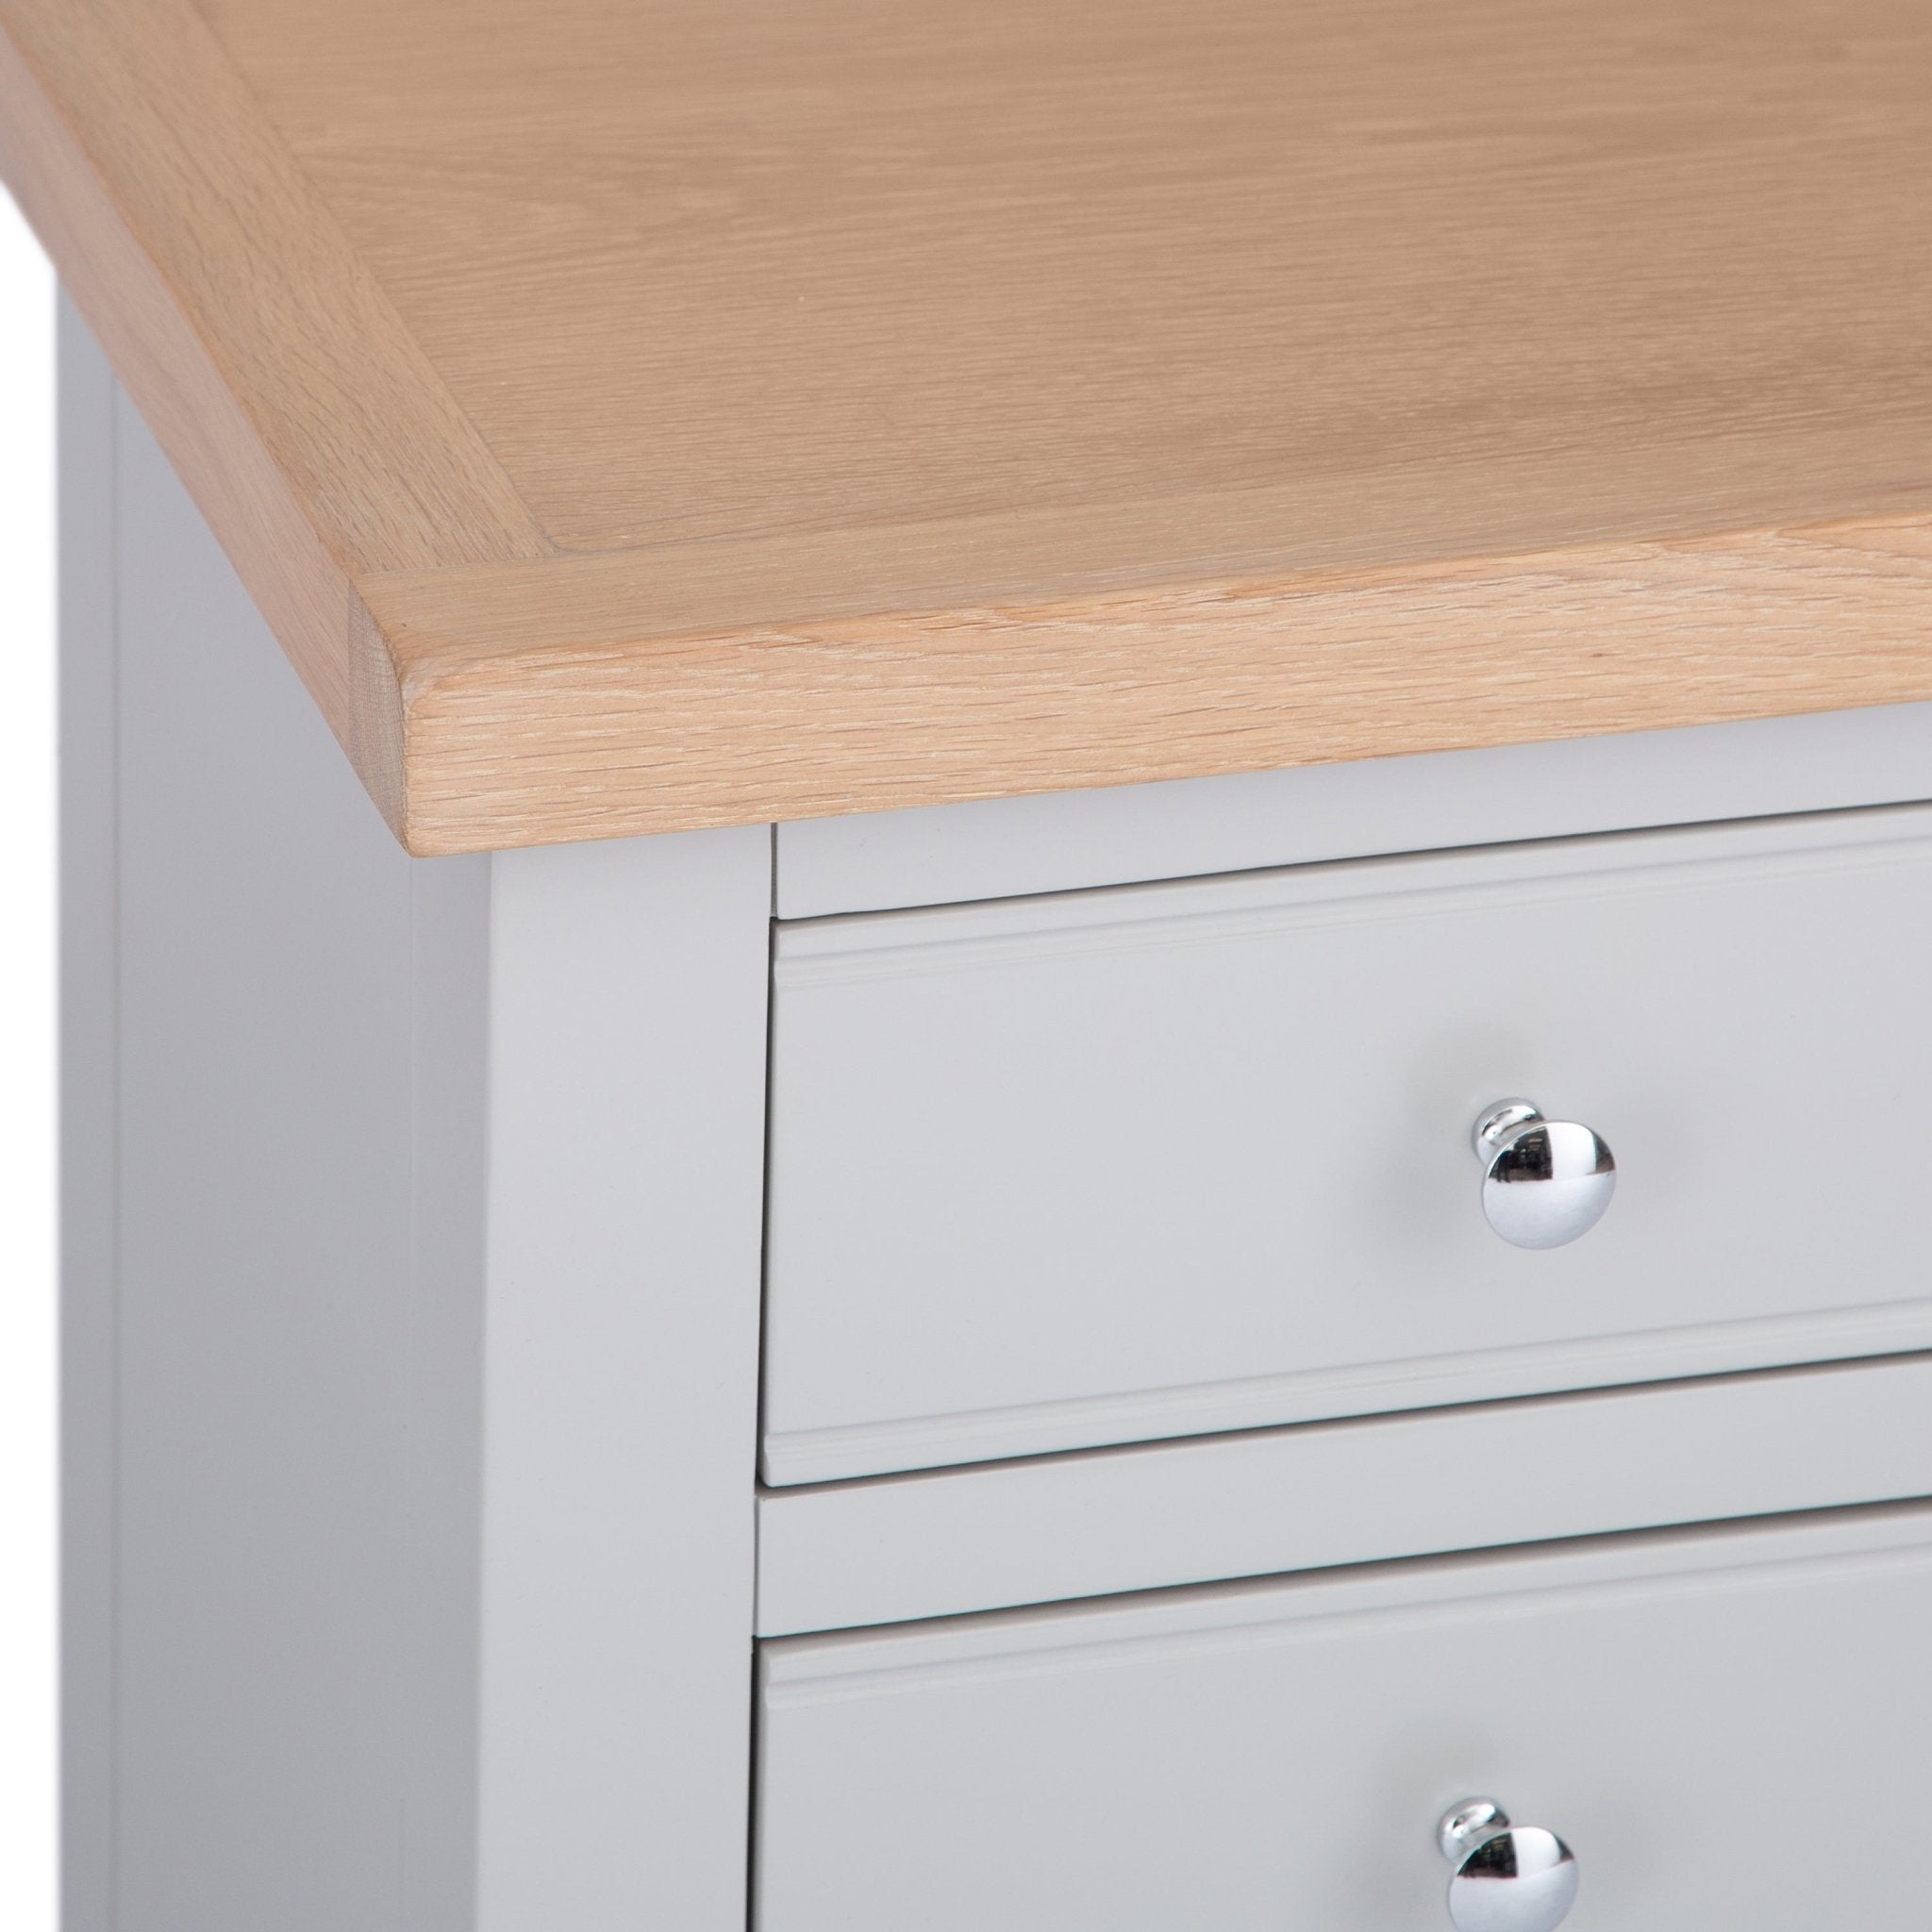 Loxhill Grey Large Bedside Cabinet - Duck Barn Interiors